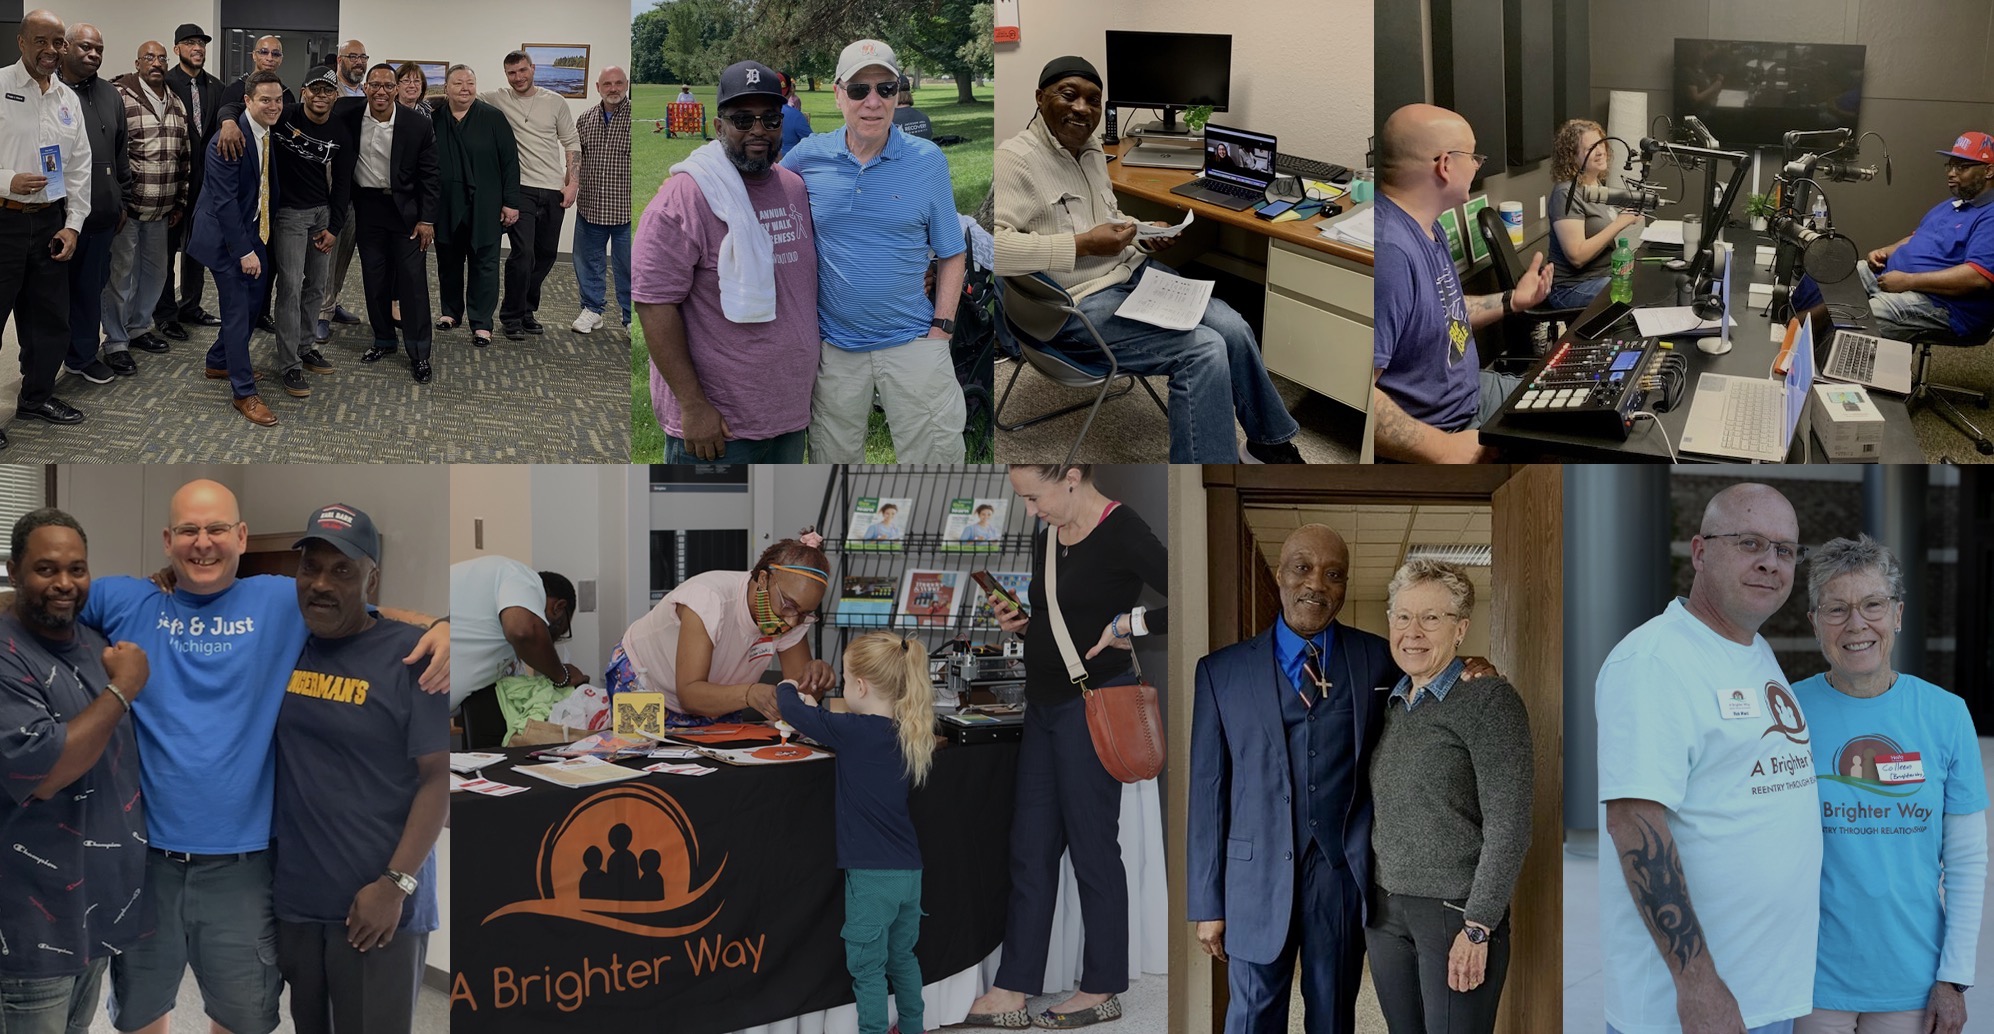 team members and community members and released formerly incarcerated individuals at A Brighter Way receiving help and services